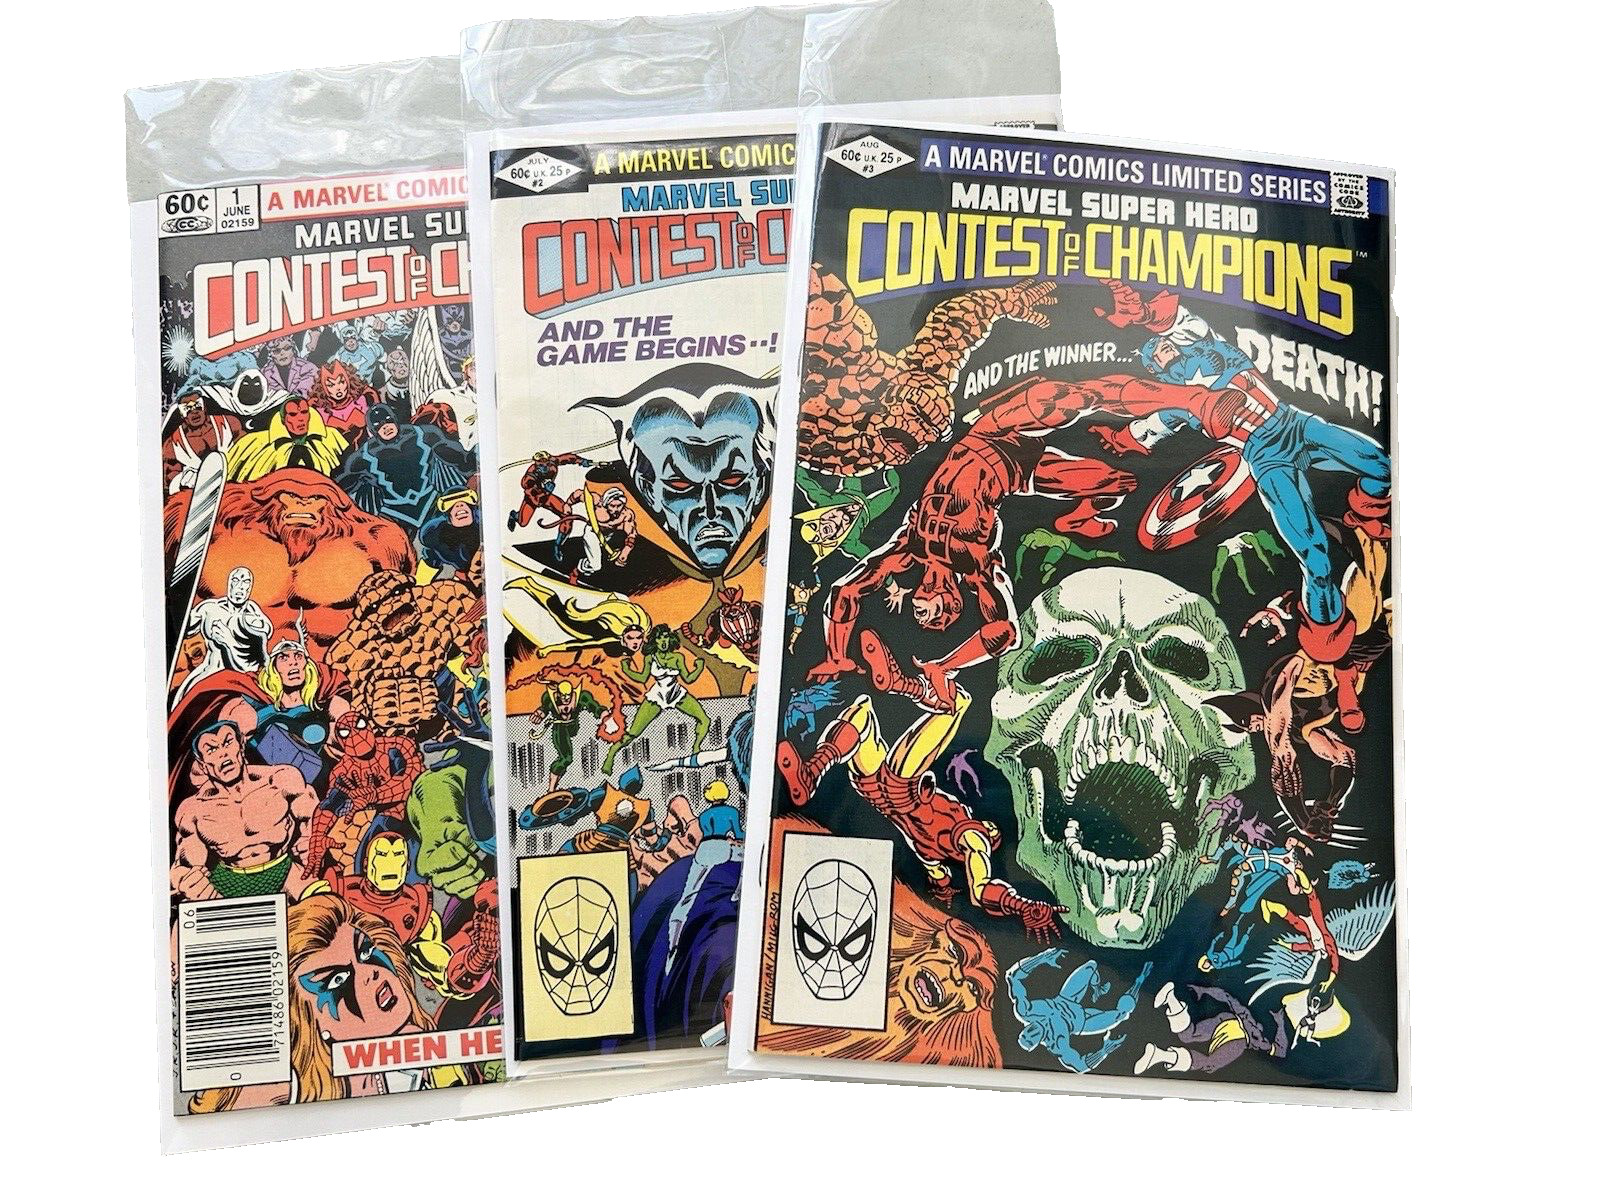 Contest of Champions Limited Series Comics #1-3, Vintage, 1982, 